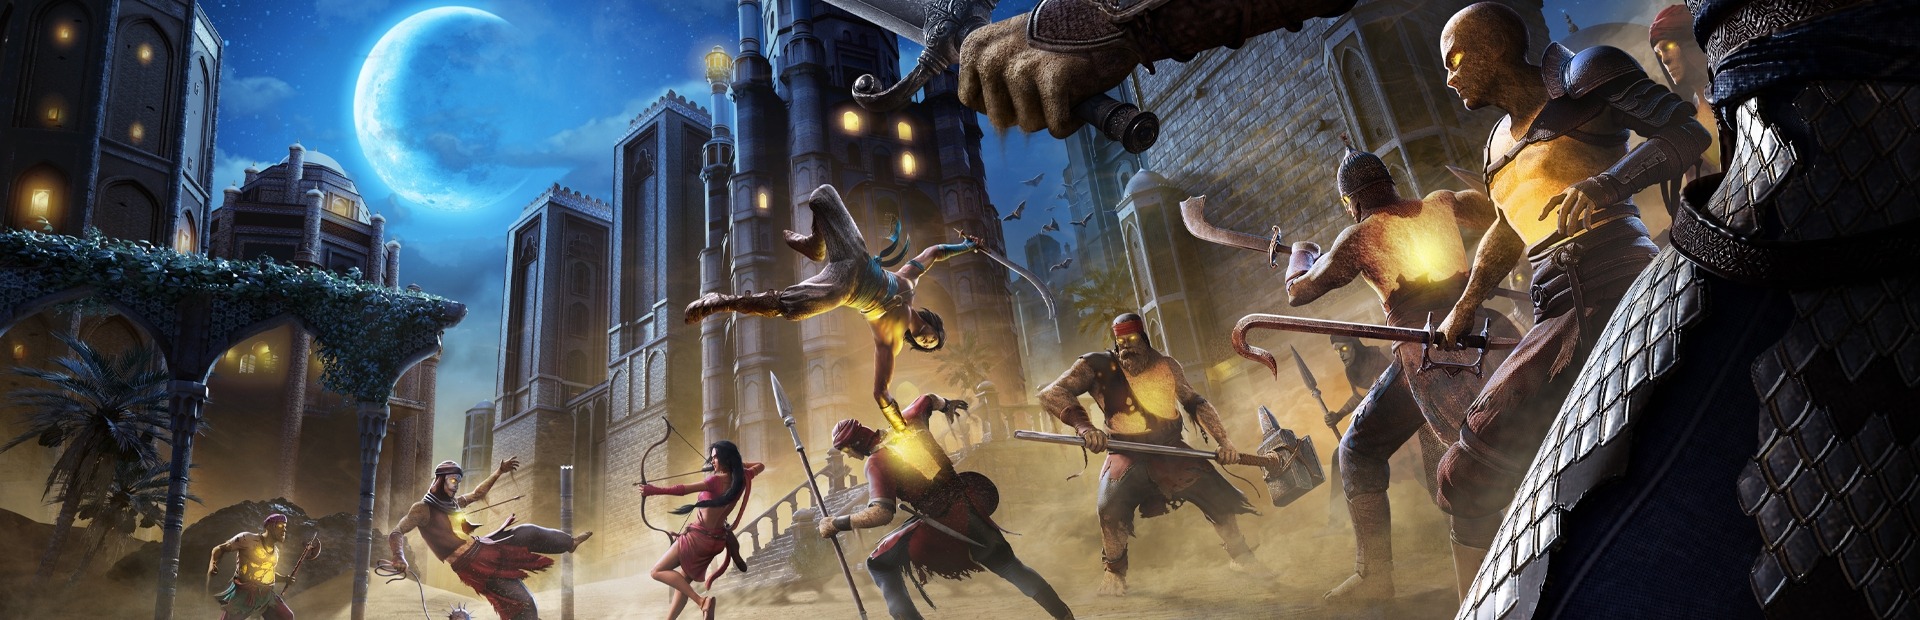 Prince of Persia: The Sands of Time Renovado